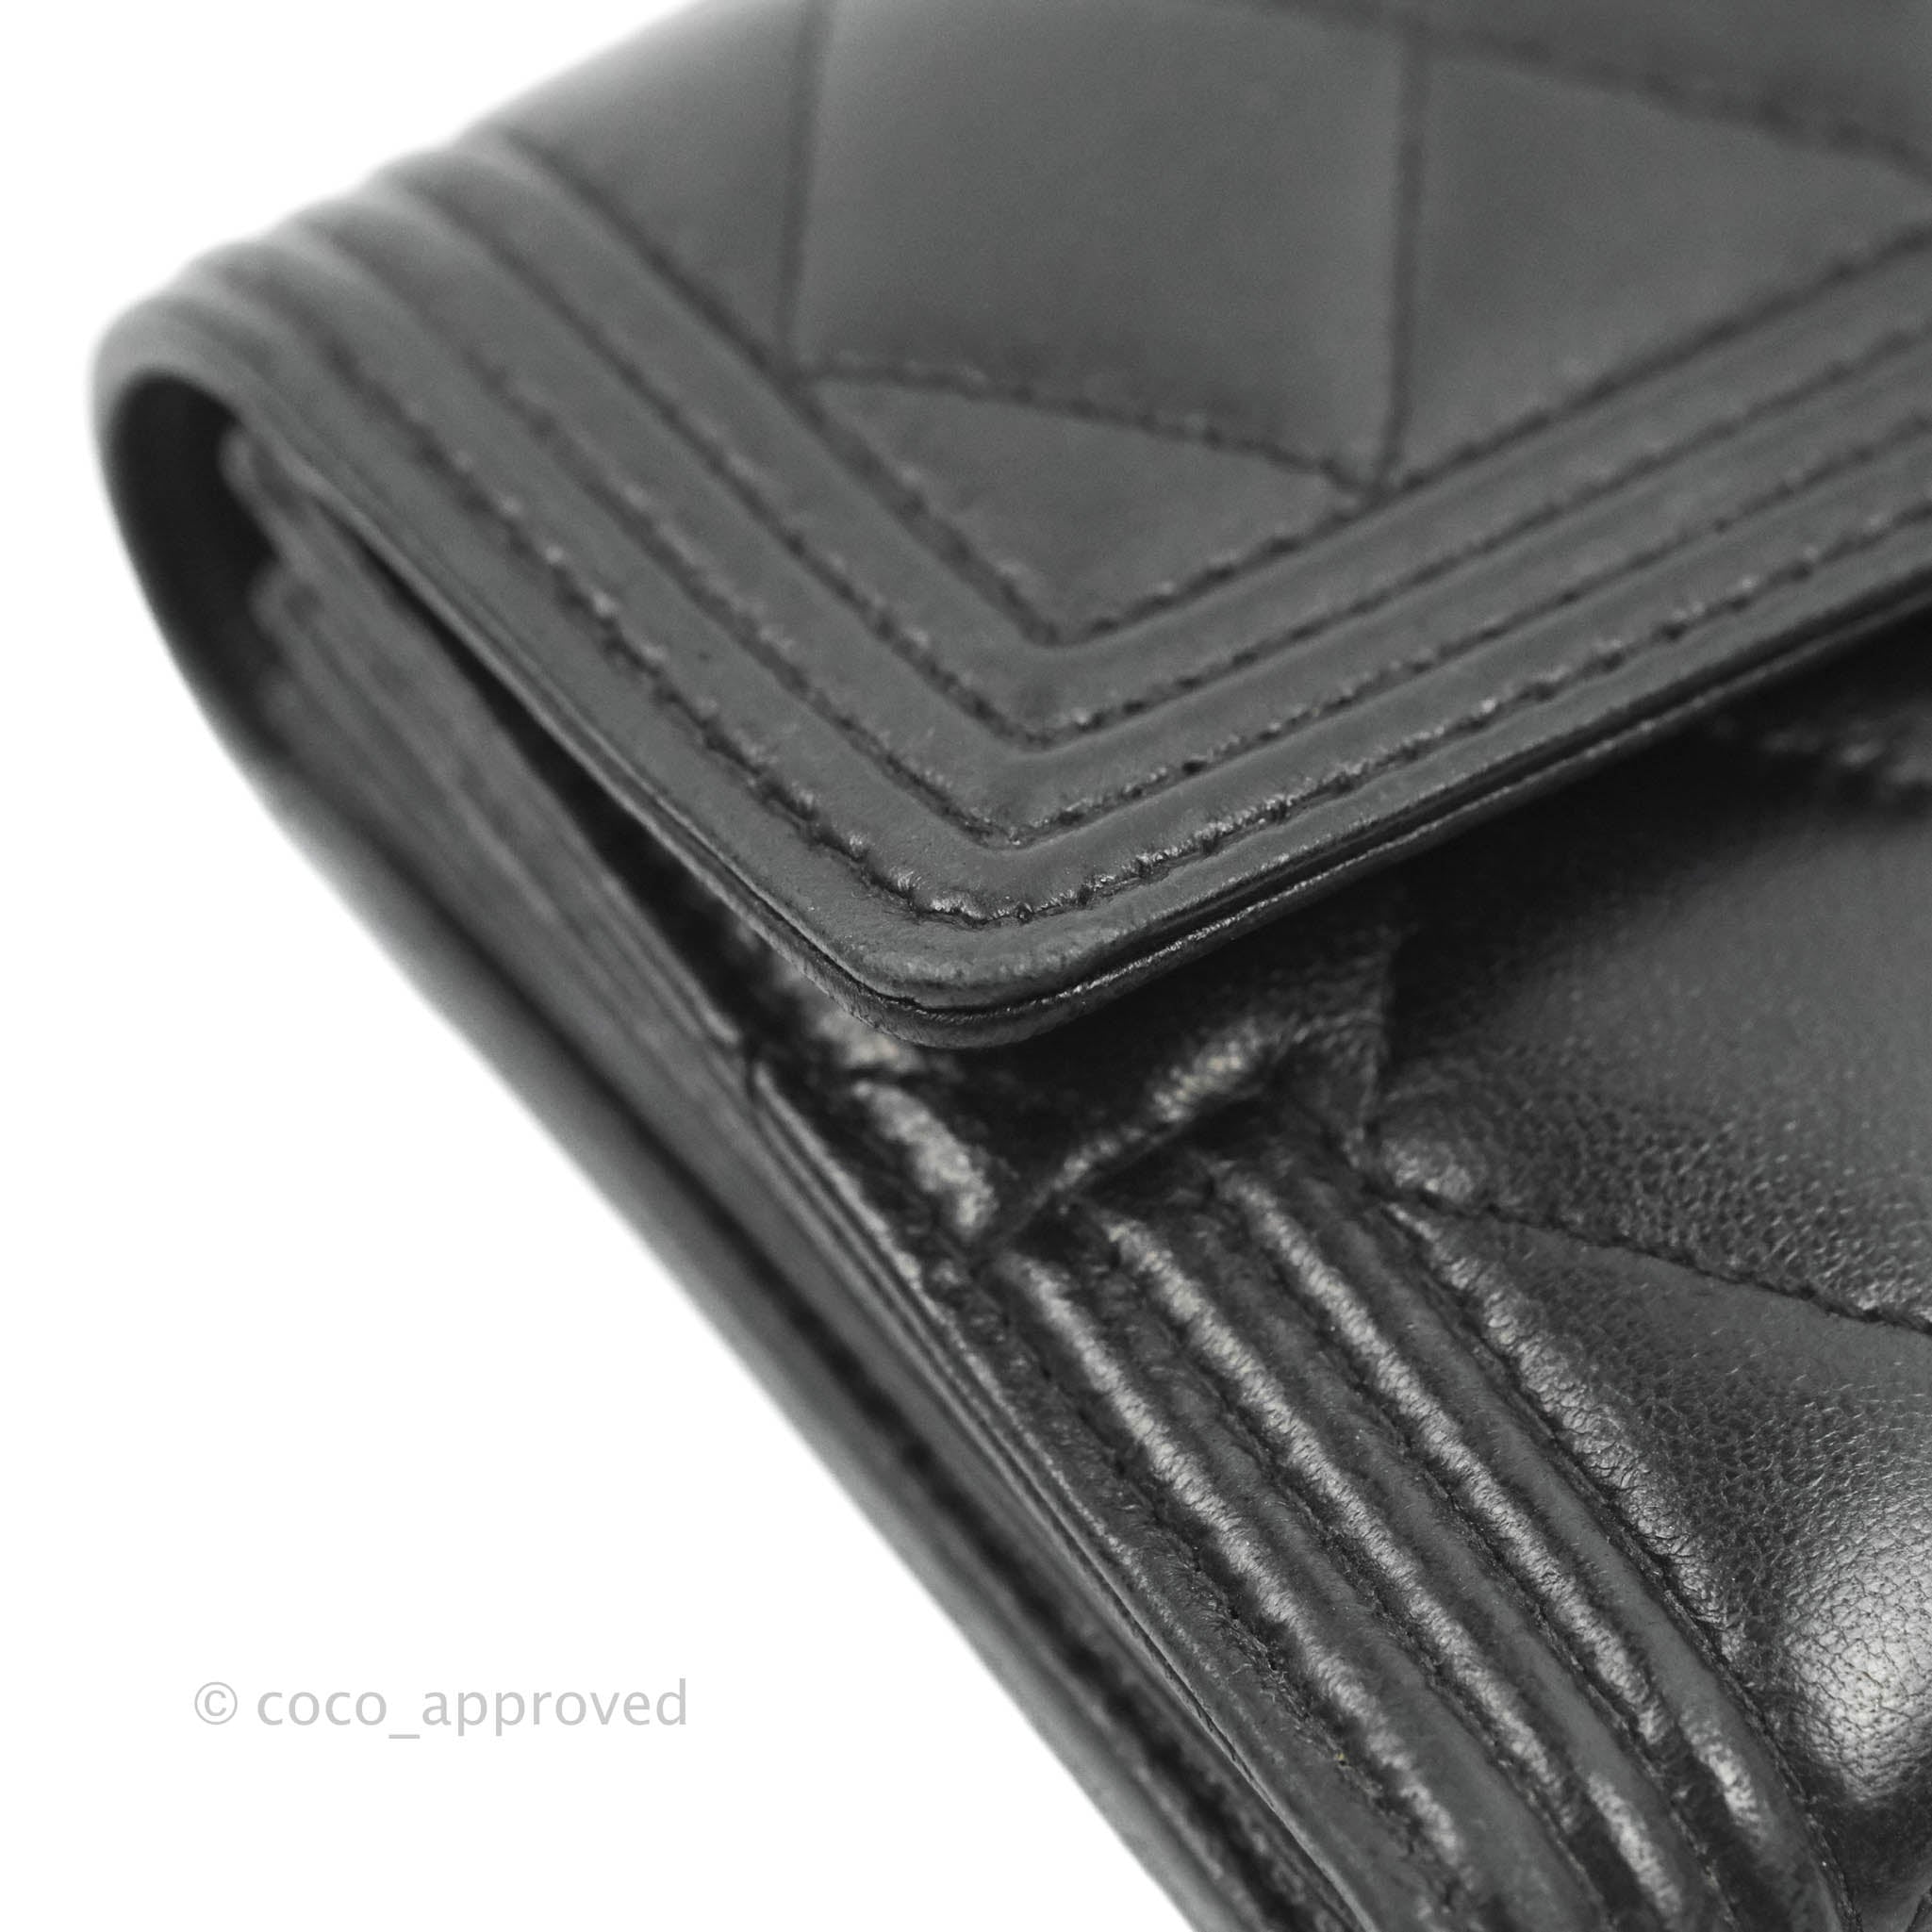 Chanel Boy Flap Wallet Quilted Glazed Aged Calfskin Long Black 1131281